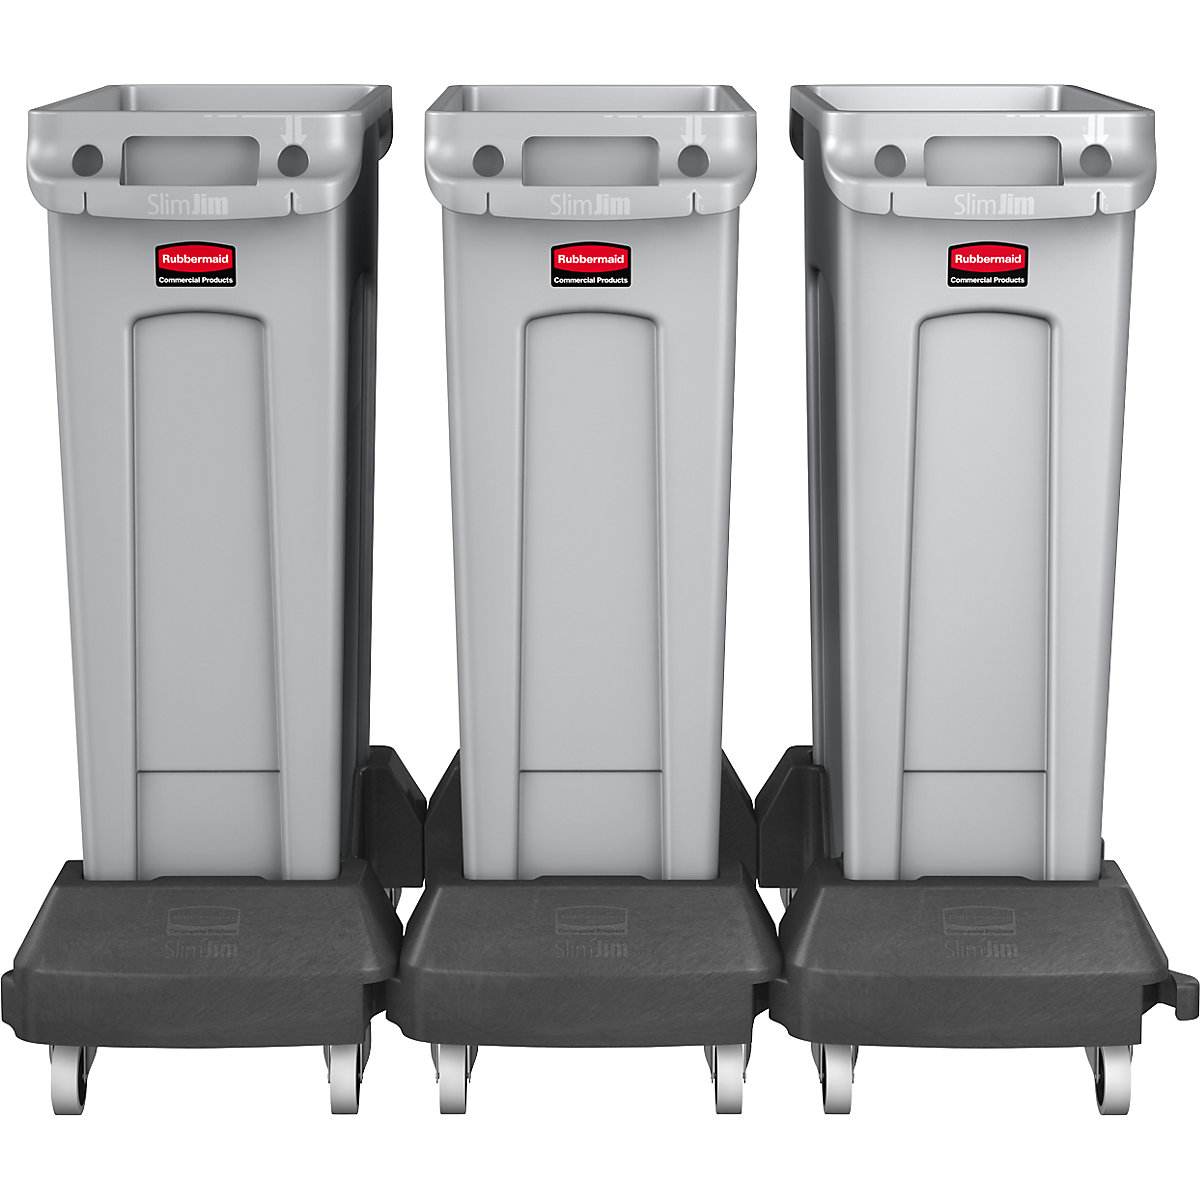 SLIM JIM® recyclable waste collection station – Rubbermaid